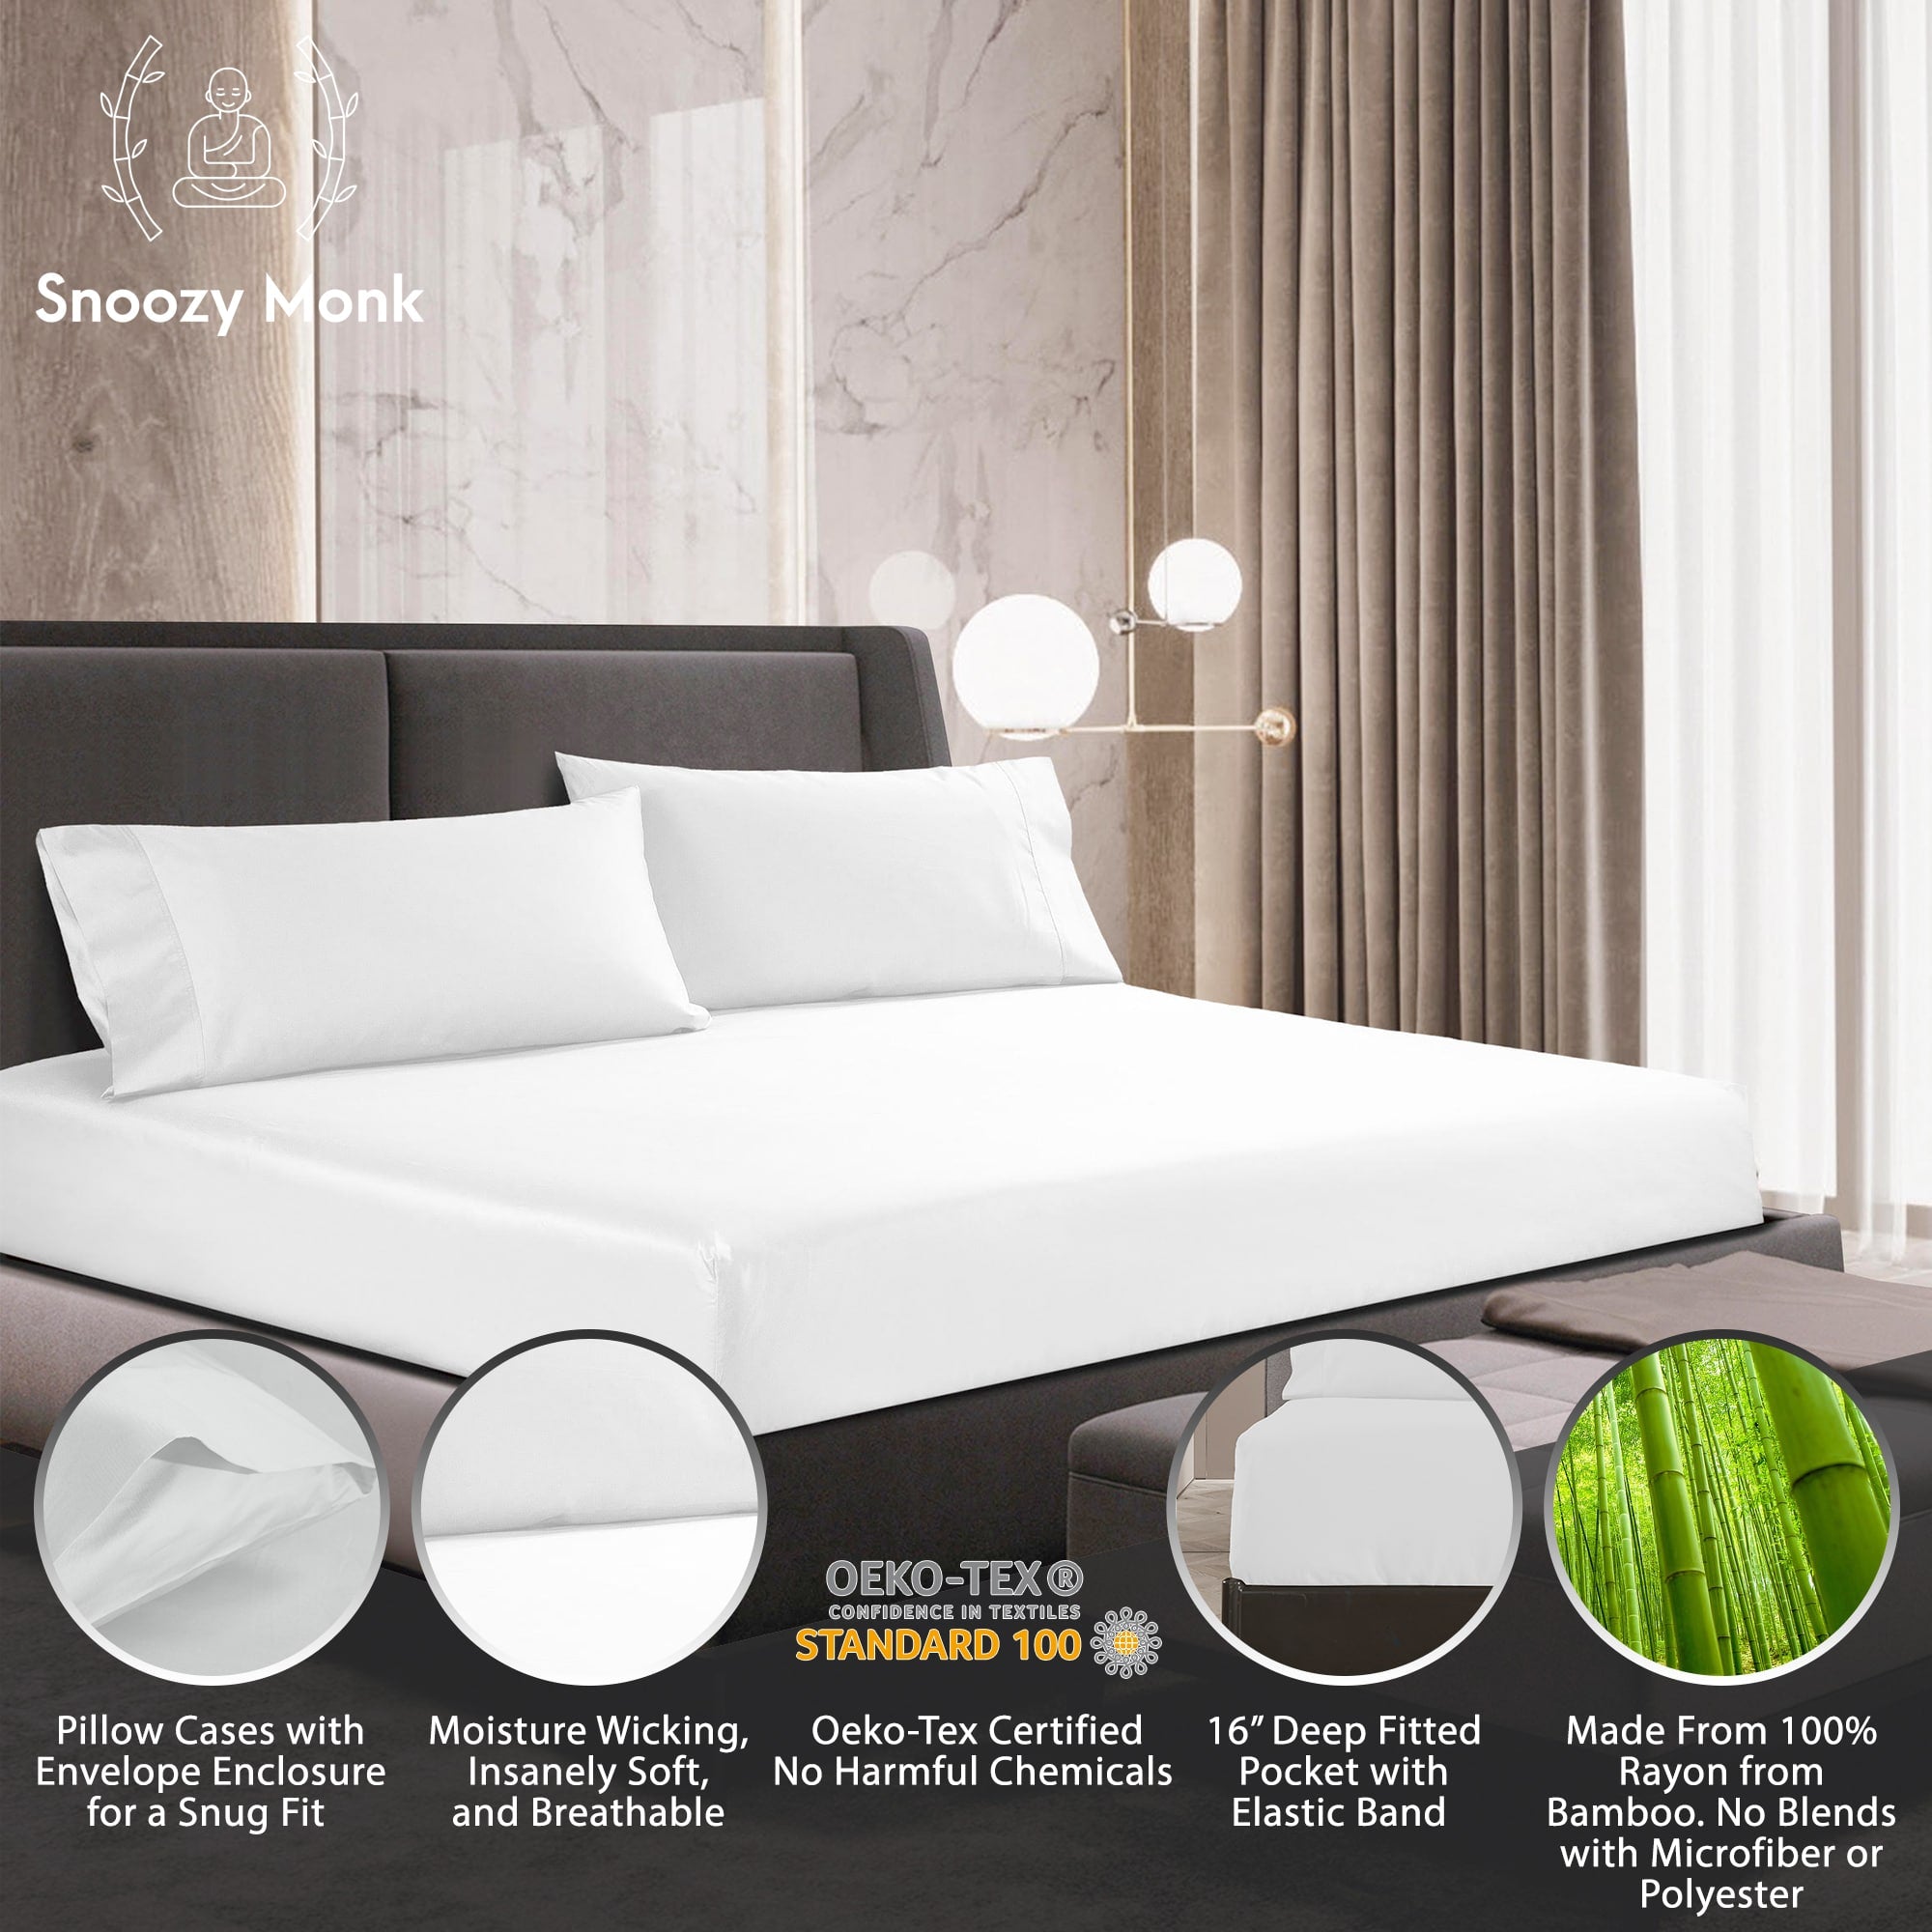 An infograph displaying the benefits of the Snoozy Monk Bamboo Sheet Set in white. 